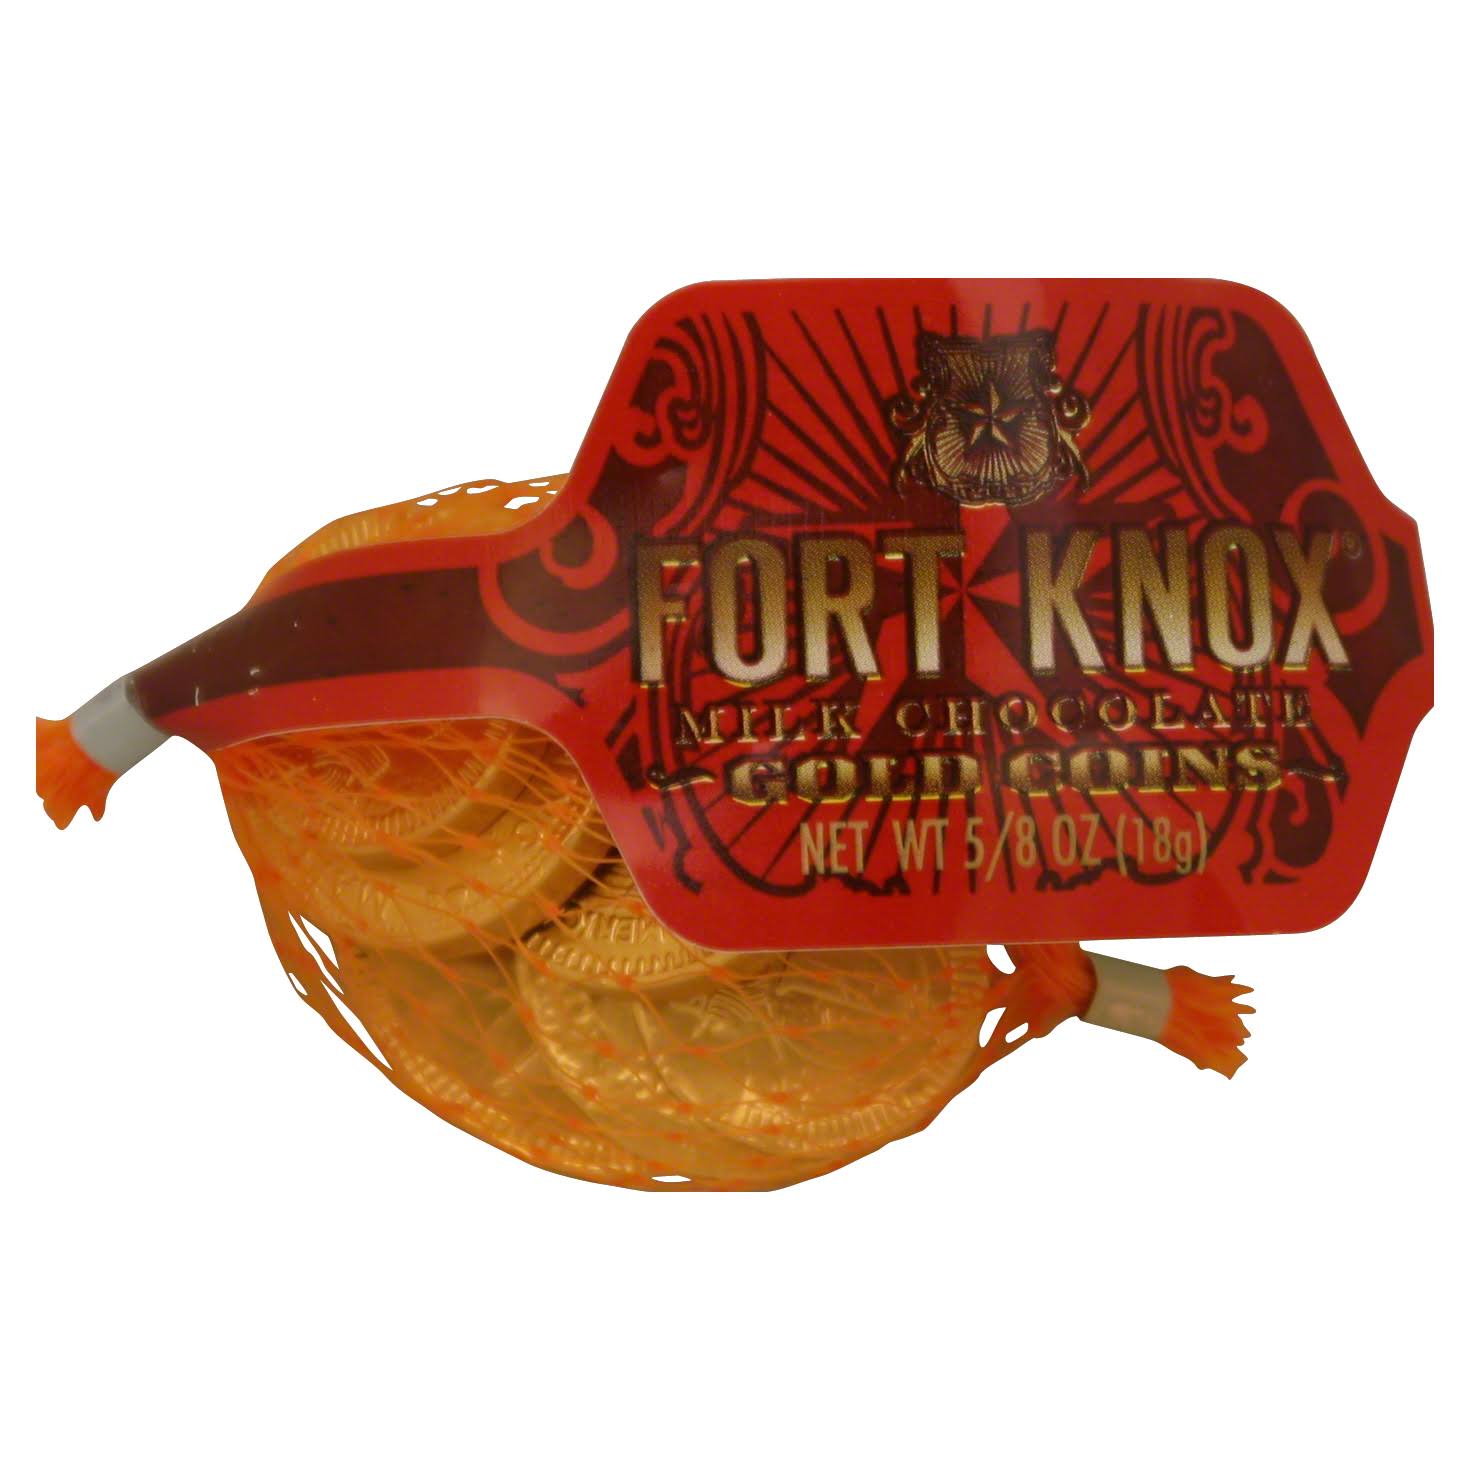 Fort Knox Milk Chocolate, Gold Coins - 0.63 oz